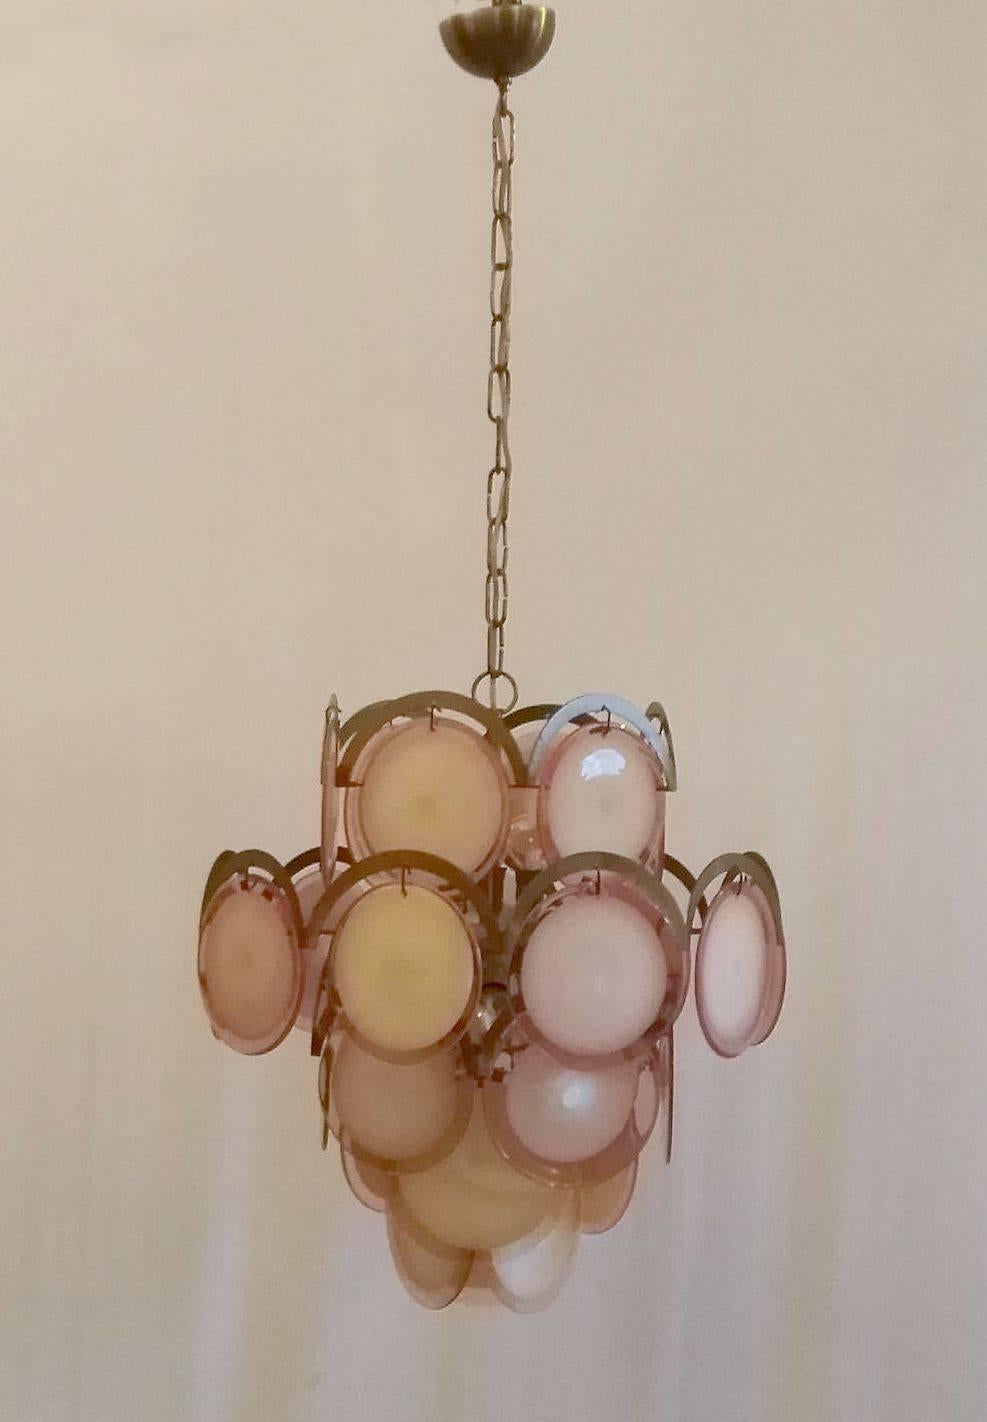 Classic chandelier by Gino Vistosi with rose colored handmade glass discs set on a brass frame.